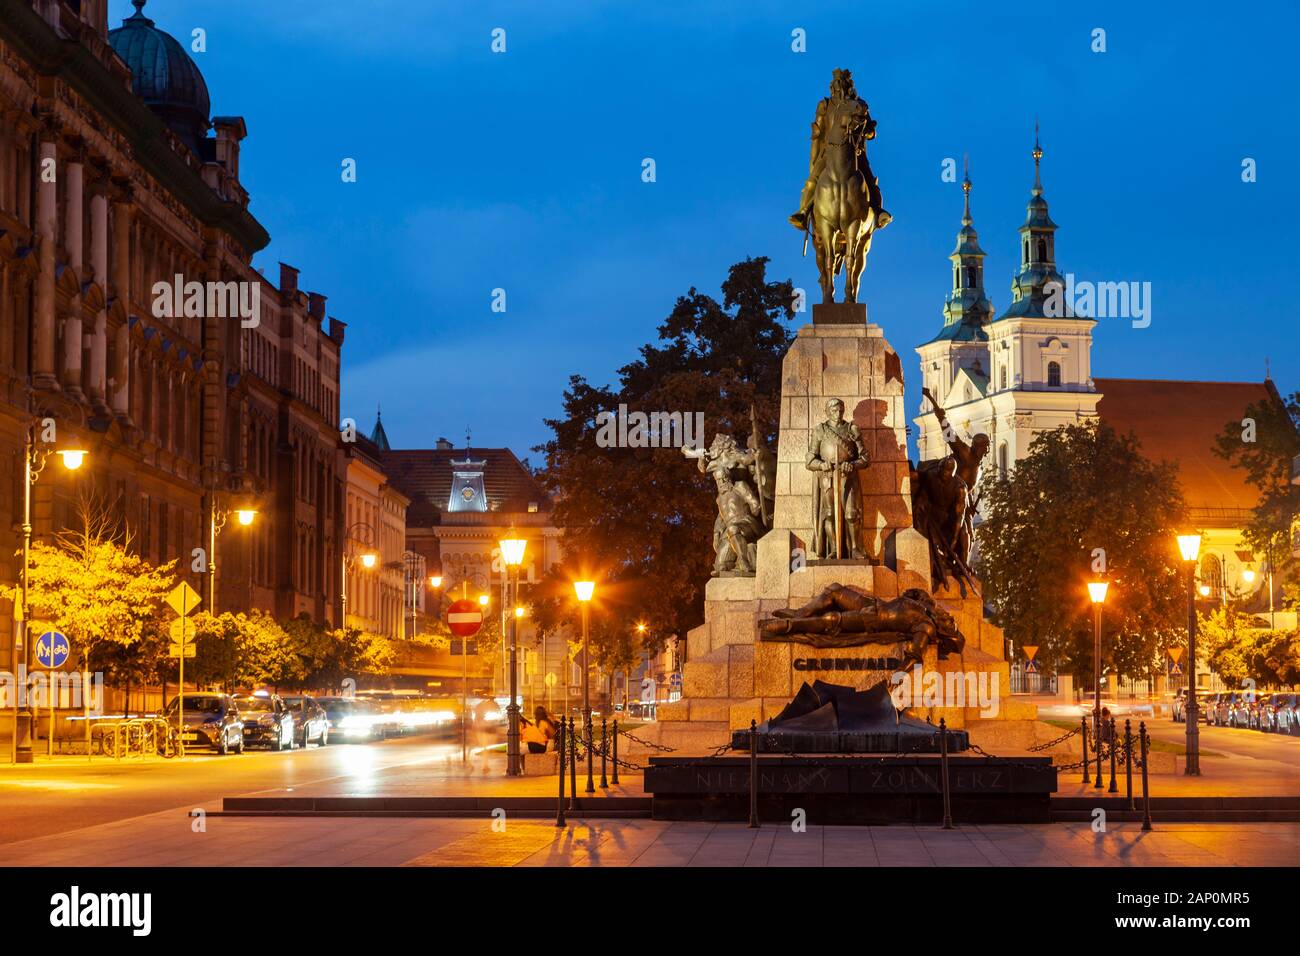 Evening at Grunwald monument in Krakow. Stock Photo